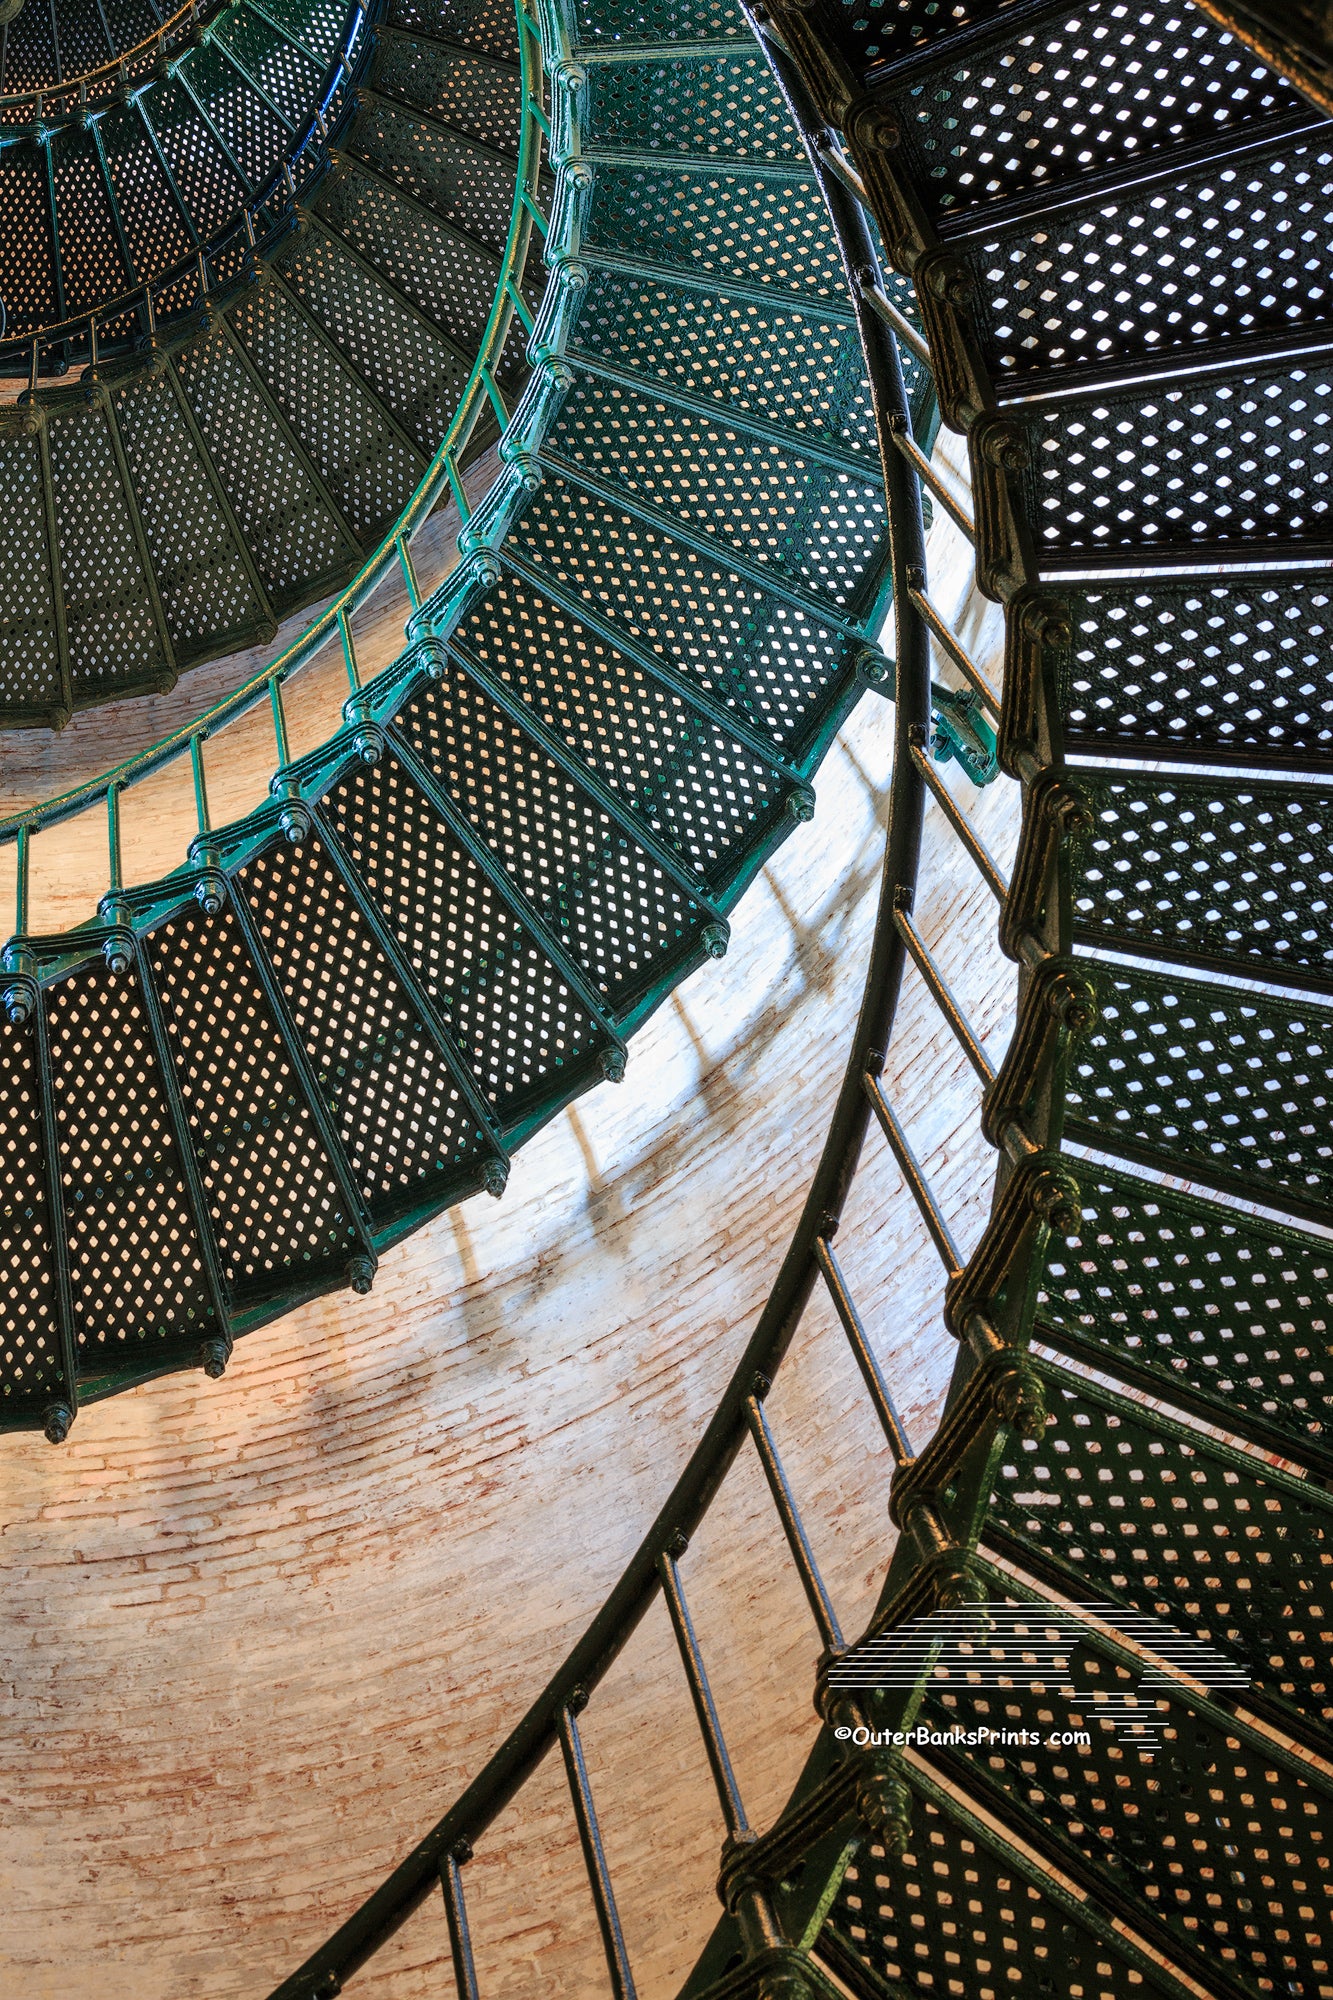 Pattern of spiral staircase inside Currituck Beach Lighthouse in Corolla North Carolina.